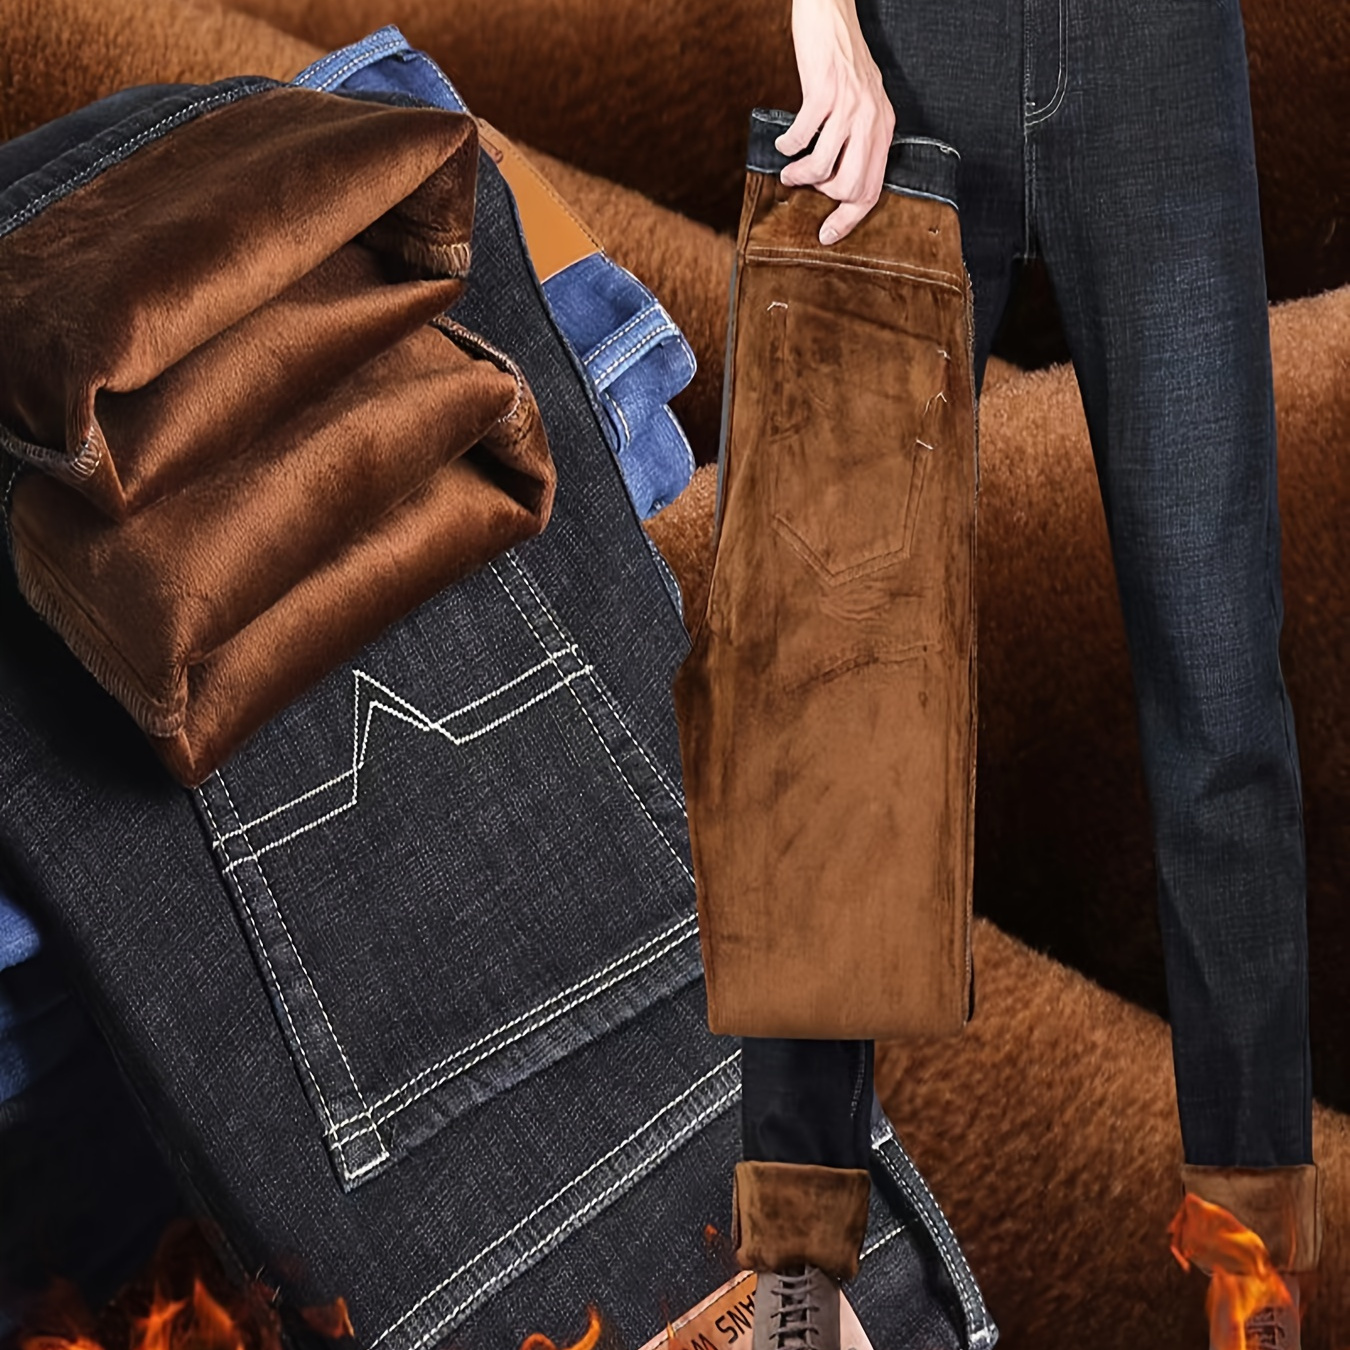 

Men's Warm Fleece Jeans For Business, Casual Medium Stretch Pants For Fall Winter, Old Money Style